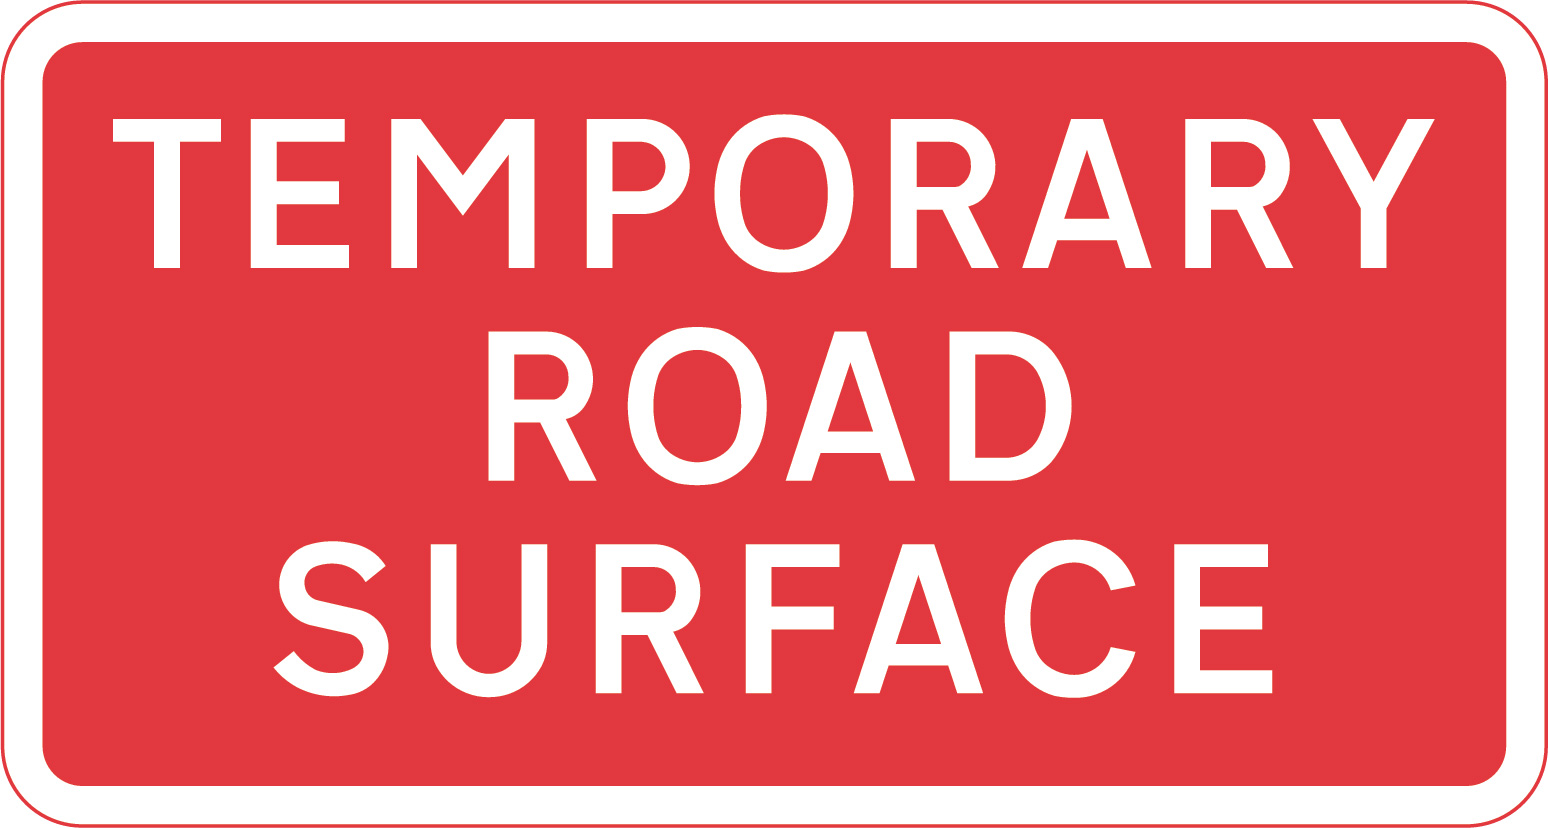 Temporary road surface sign